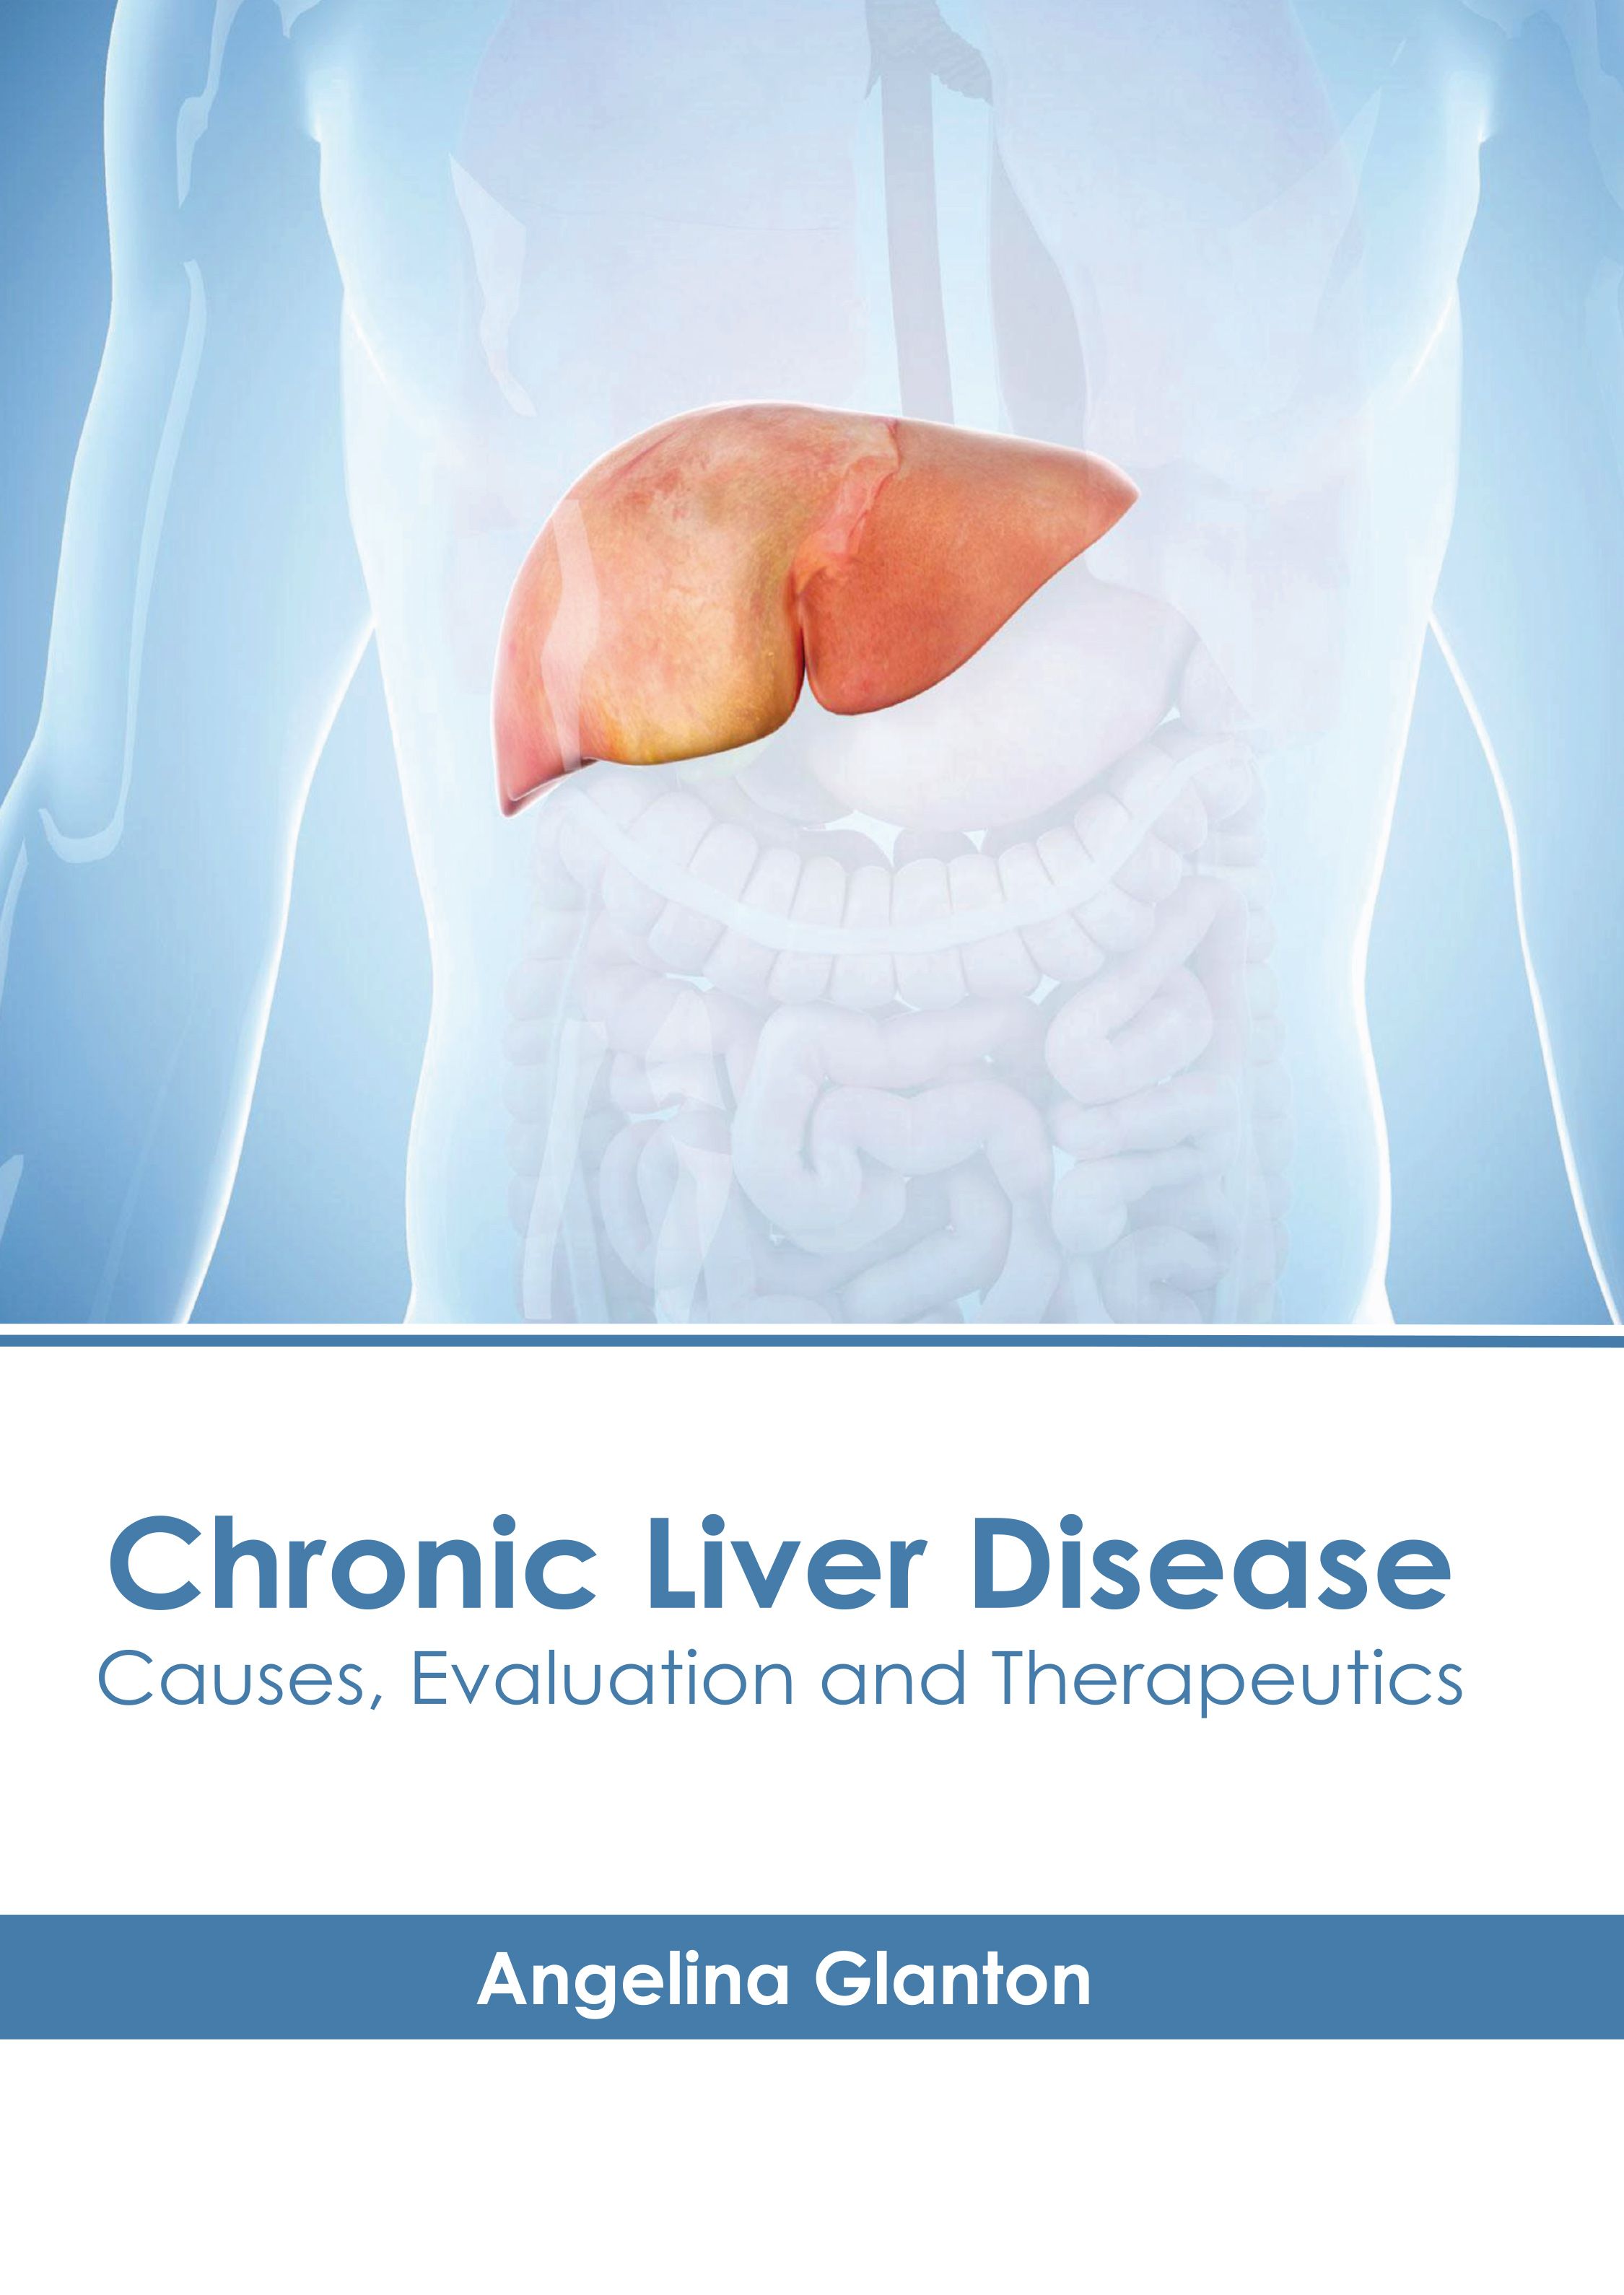 CHRONIC LIVER DISEASE: CAUSES, EVALUATION AND THERAPEUTICS